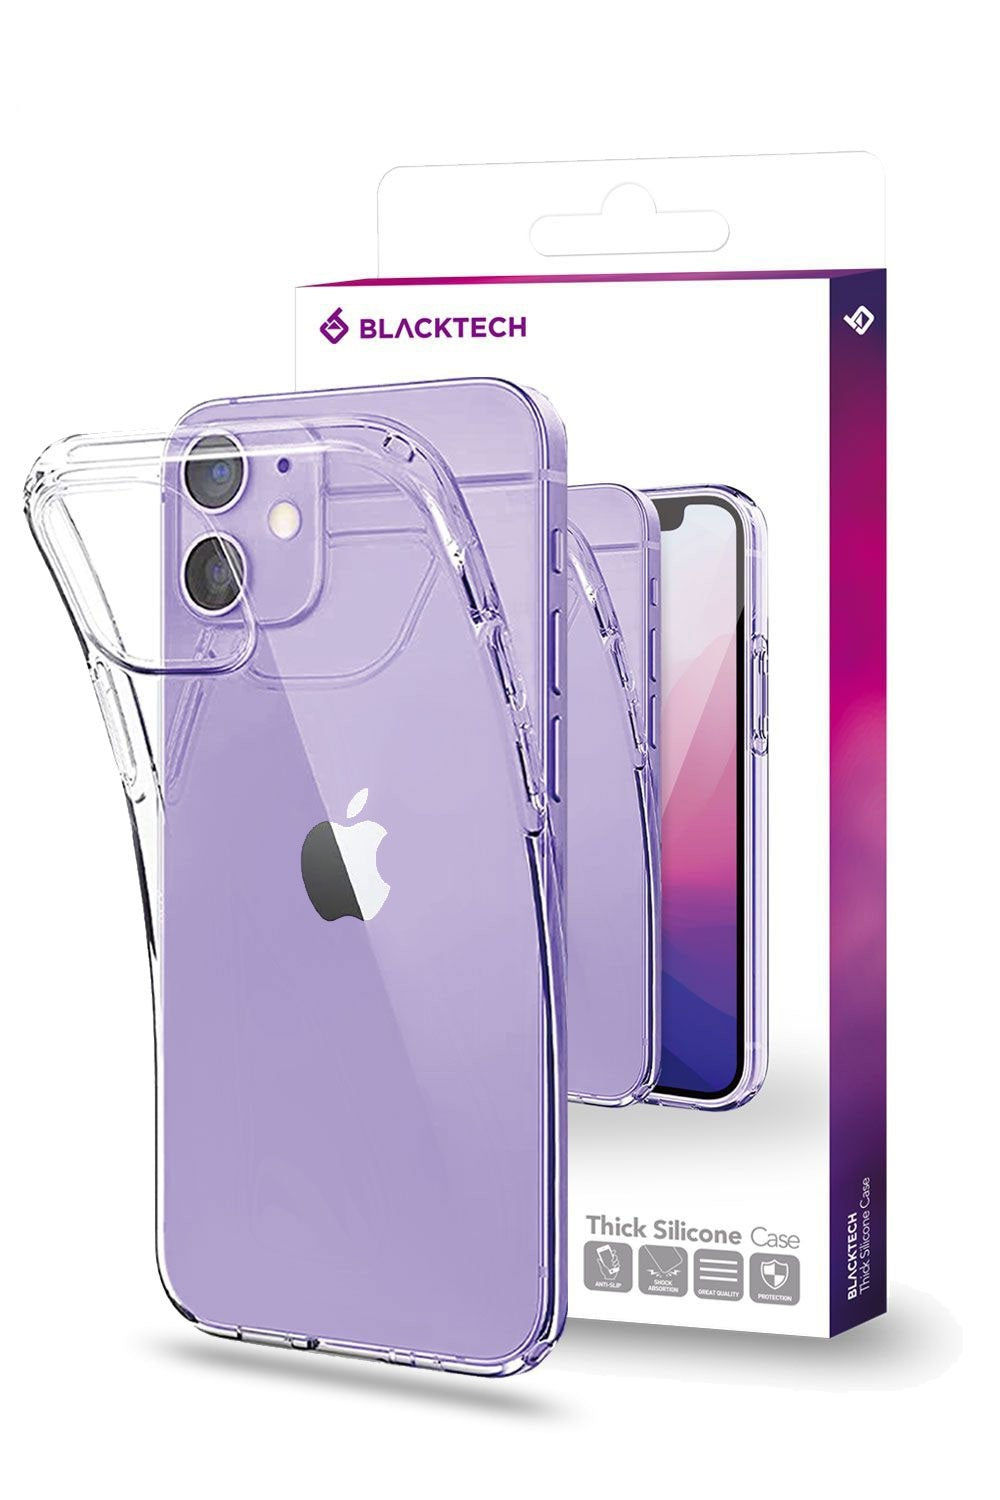 Samsung A Series BLACKTECH Ultra-Clear Shockproof Bumper Back Case Cover